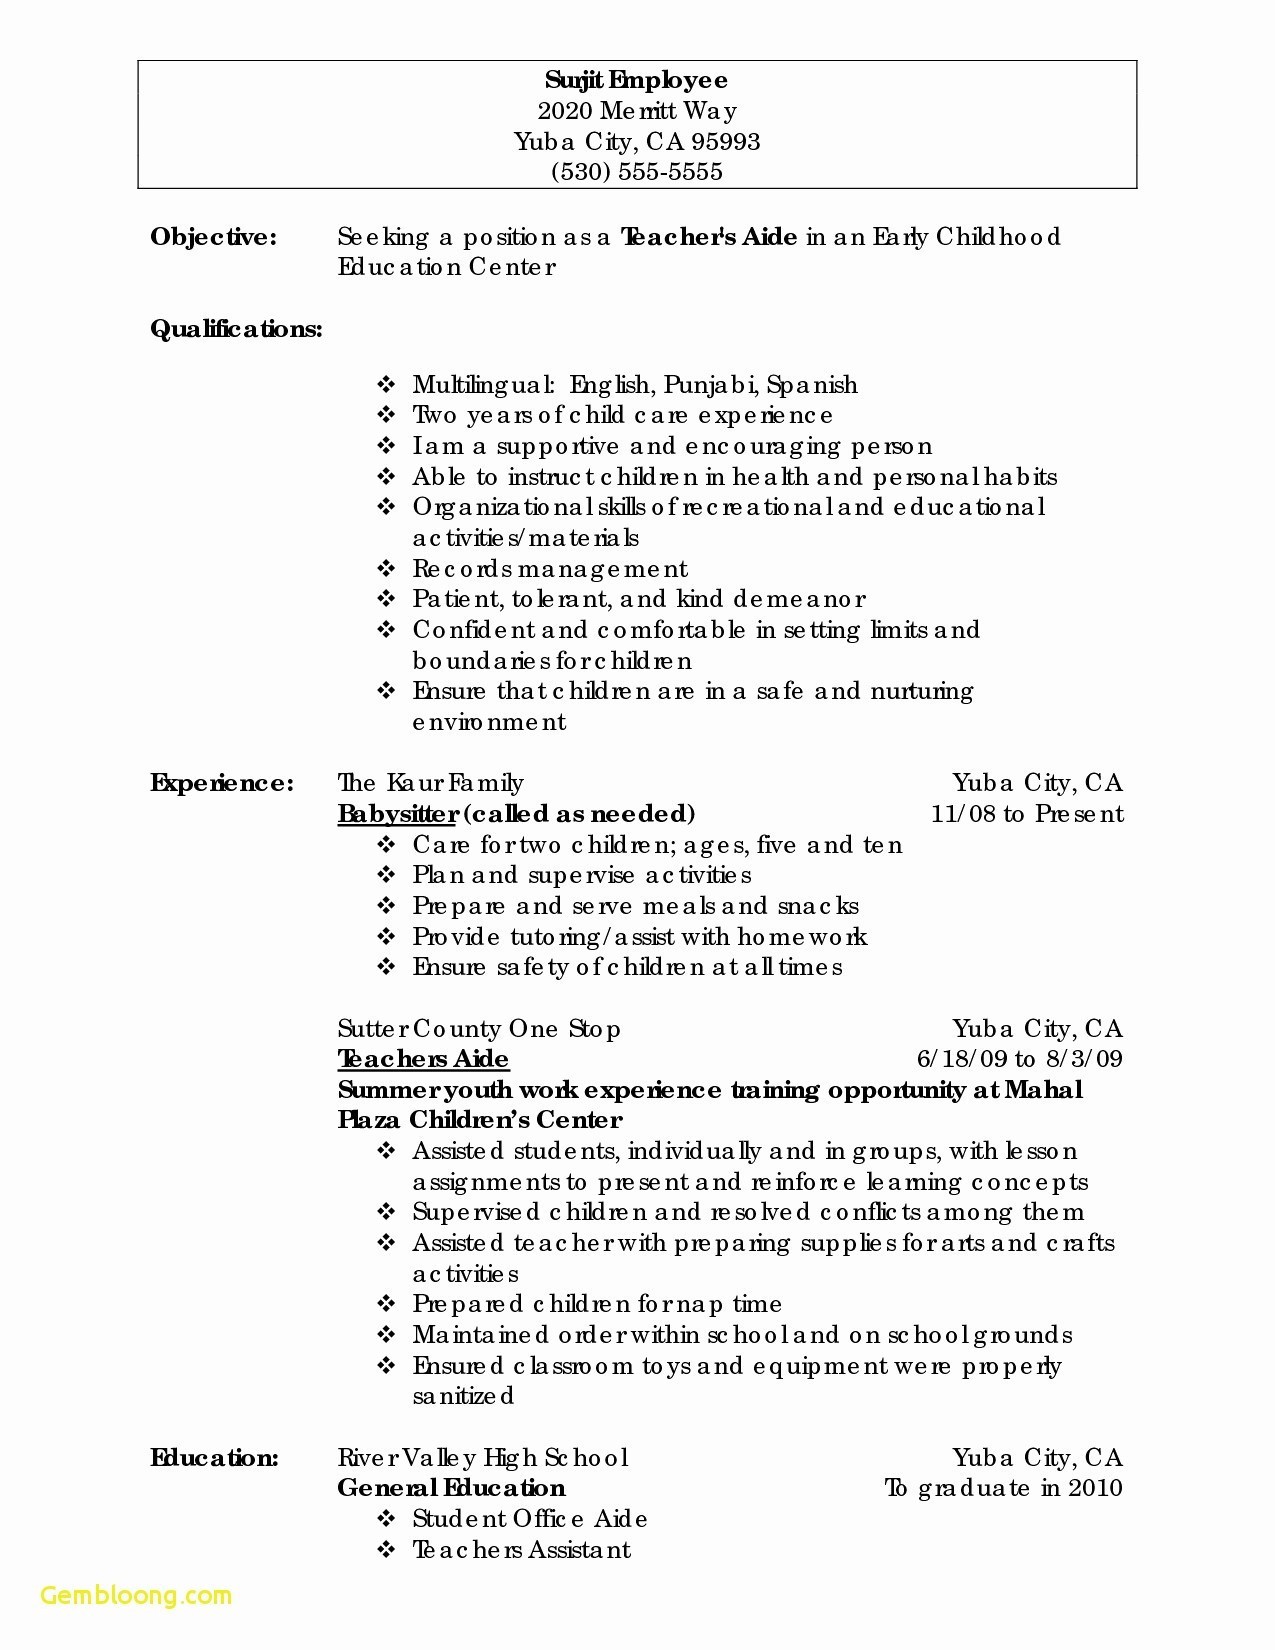 Resume For High School Student High School Student Resume Samples No Experience Valid Examples For First Time Job resume for high school student|wikiresume.com